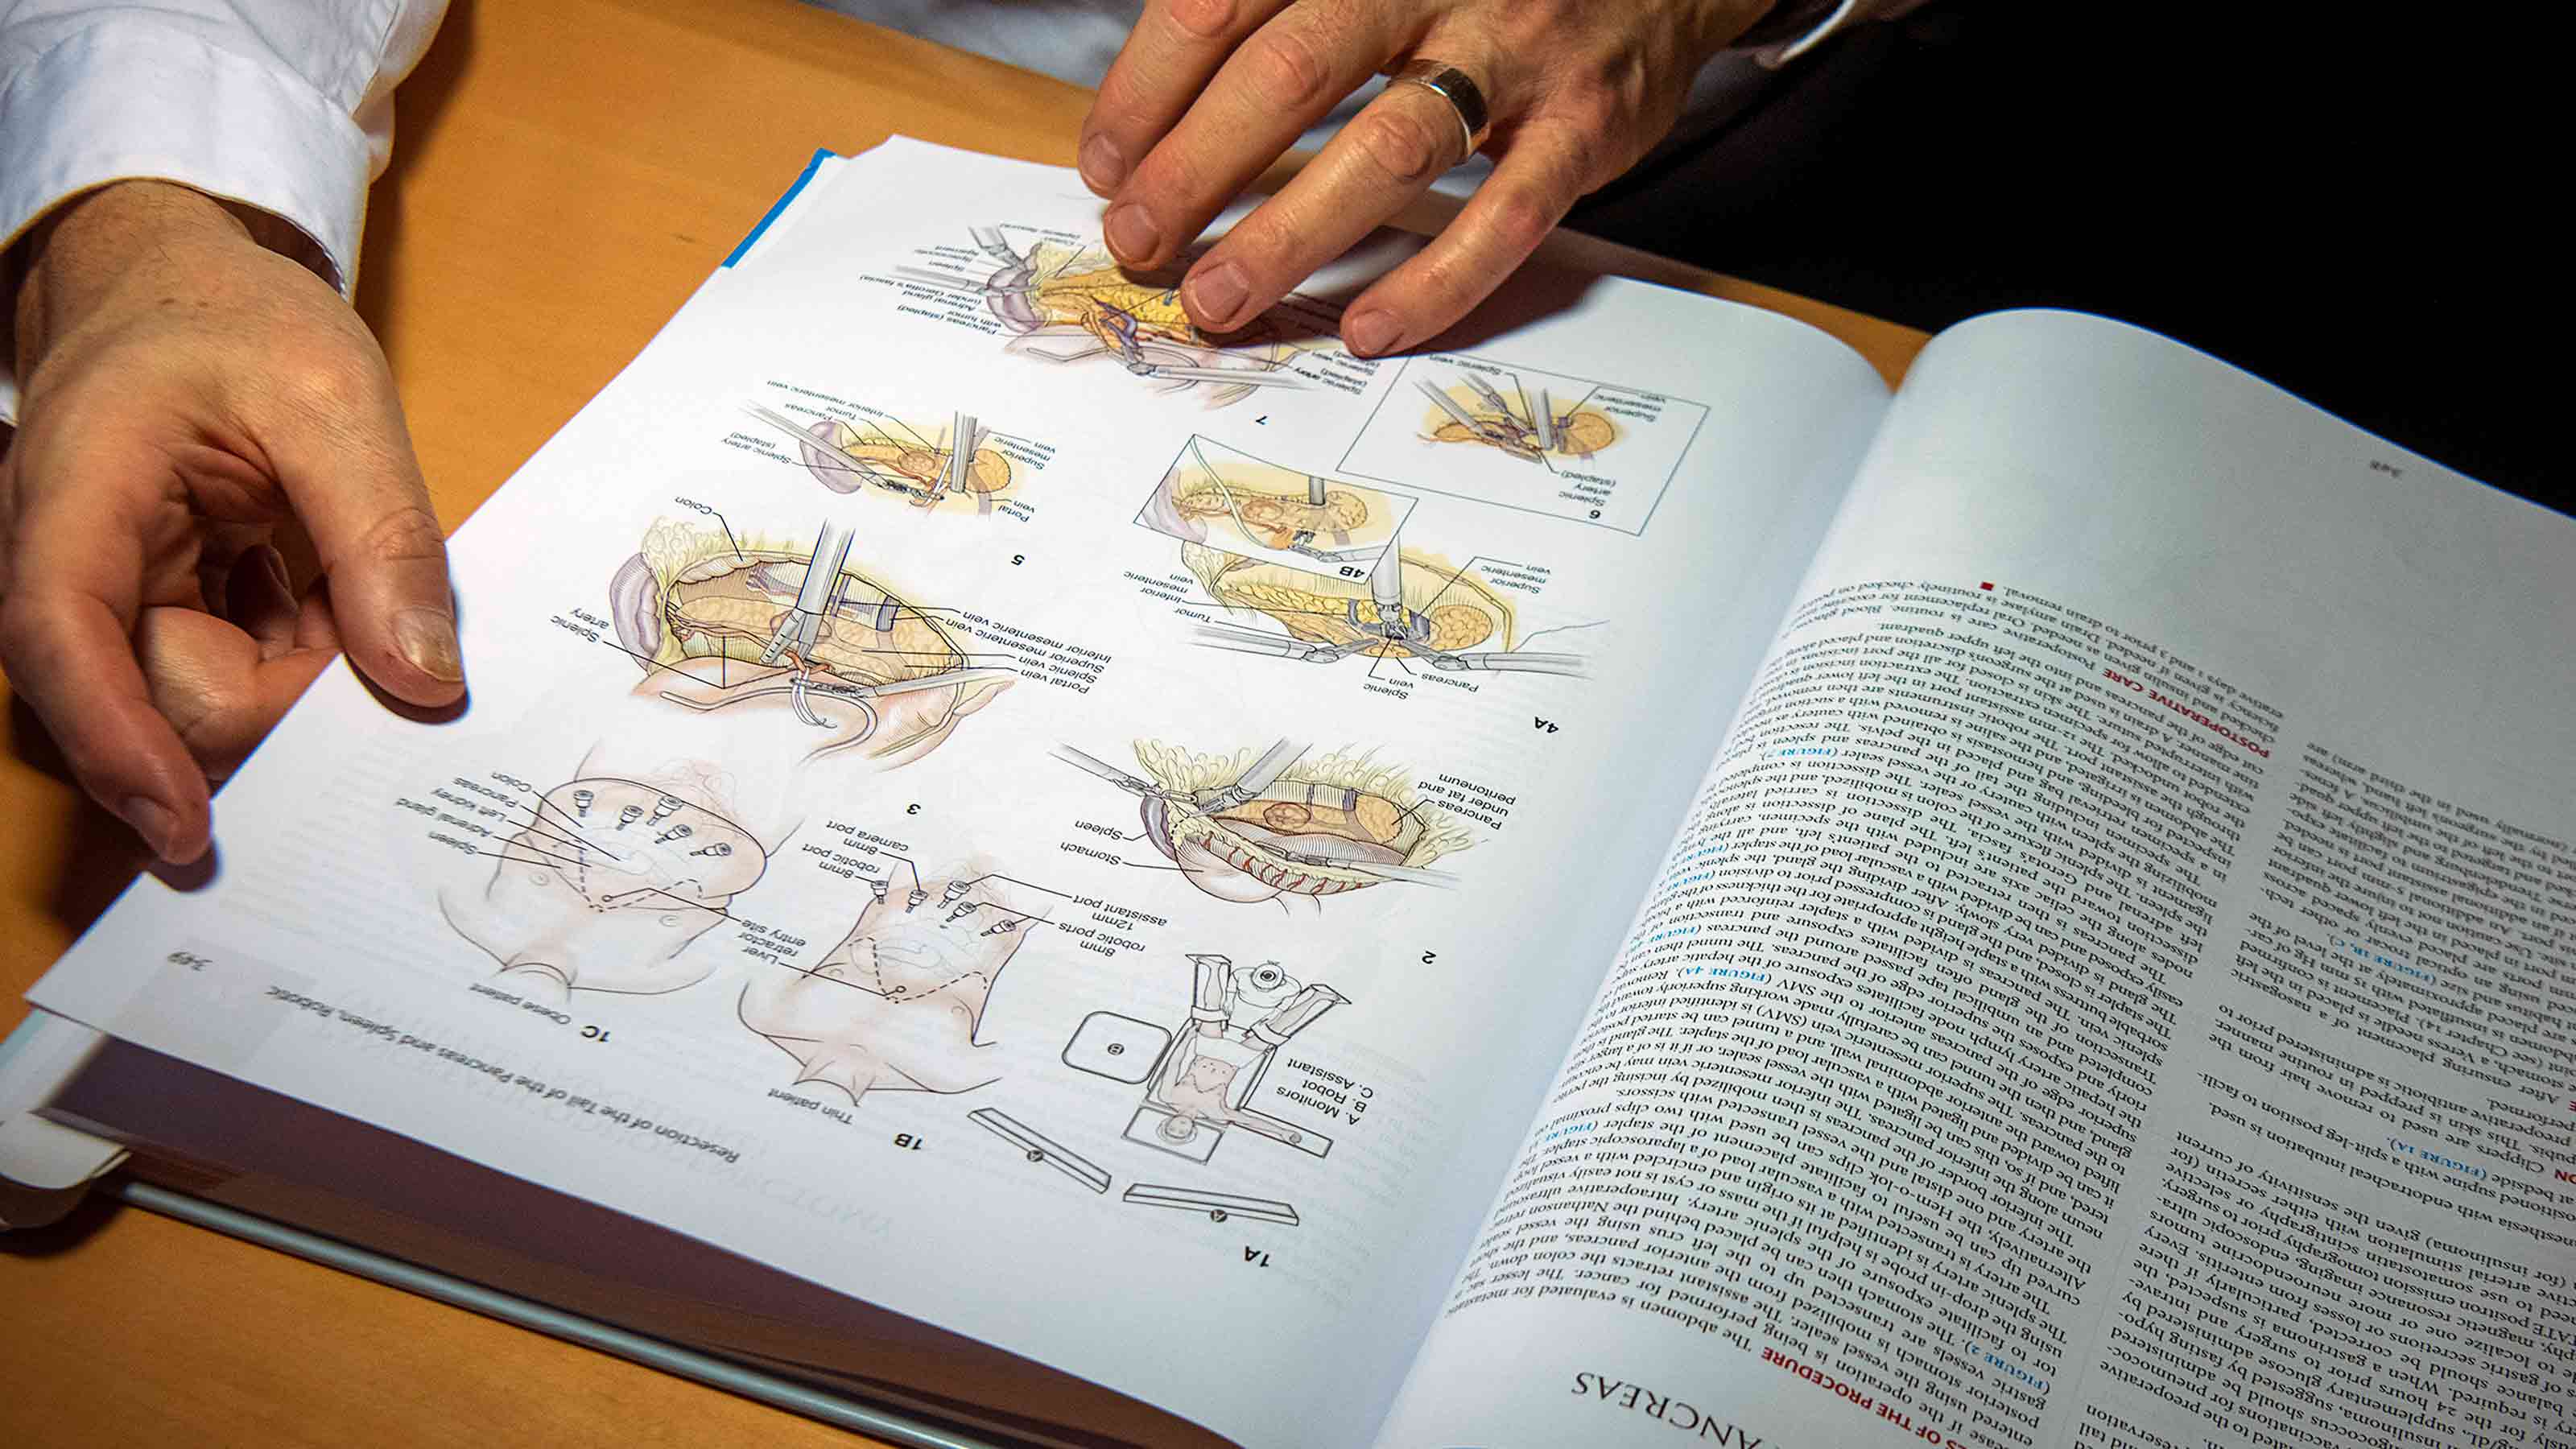 illustrations in the Atlas of Surgical Operations